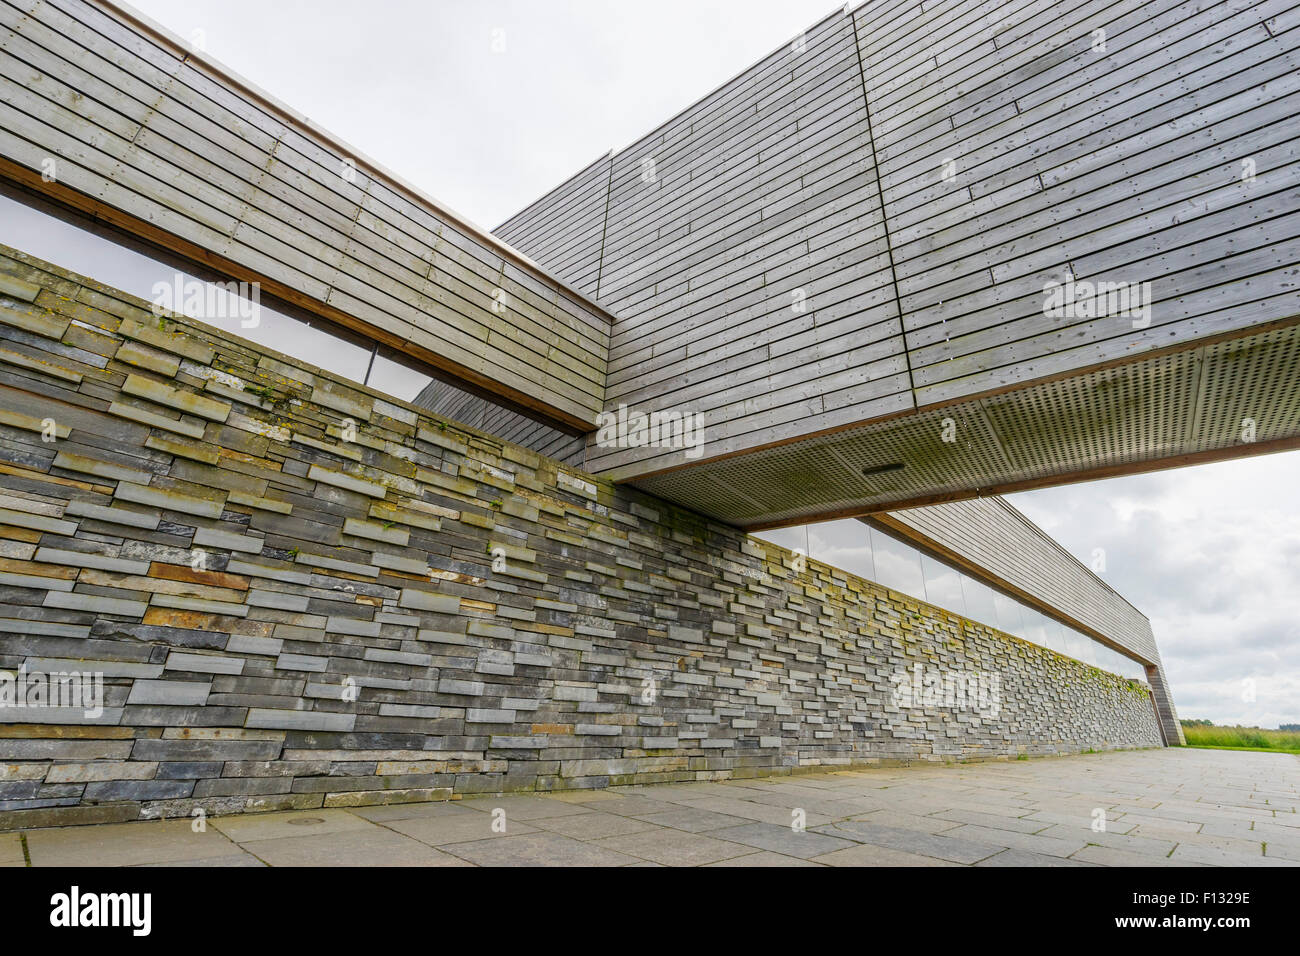 National Trust for Scotland Visitor Centre at Culloden Moor in Scotland. Stock Photo